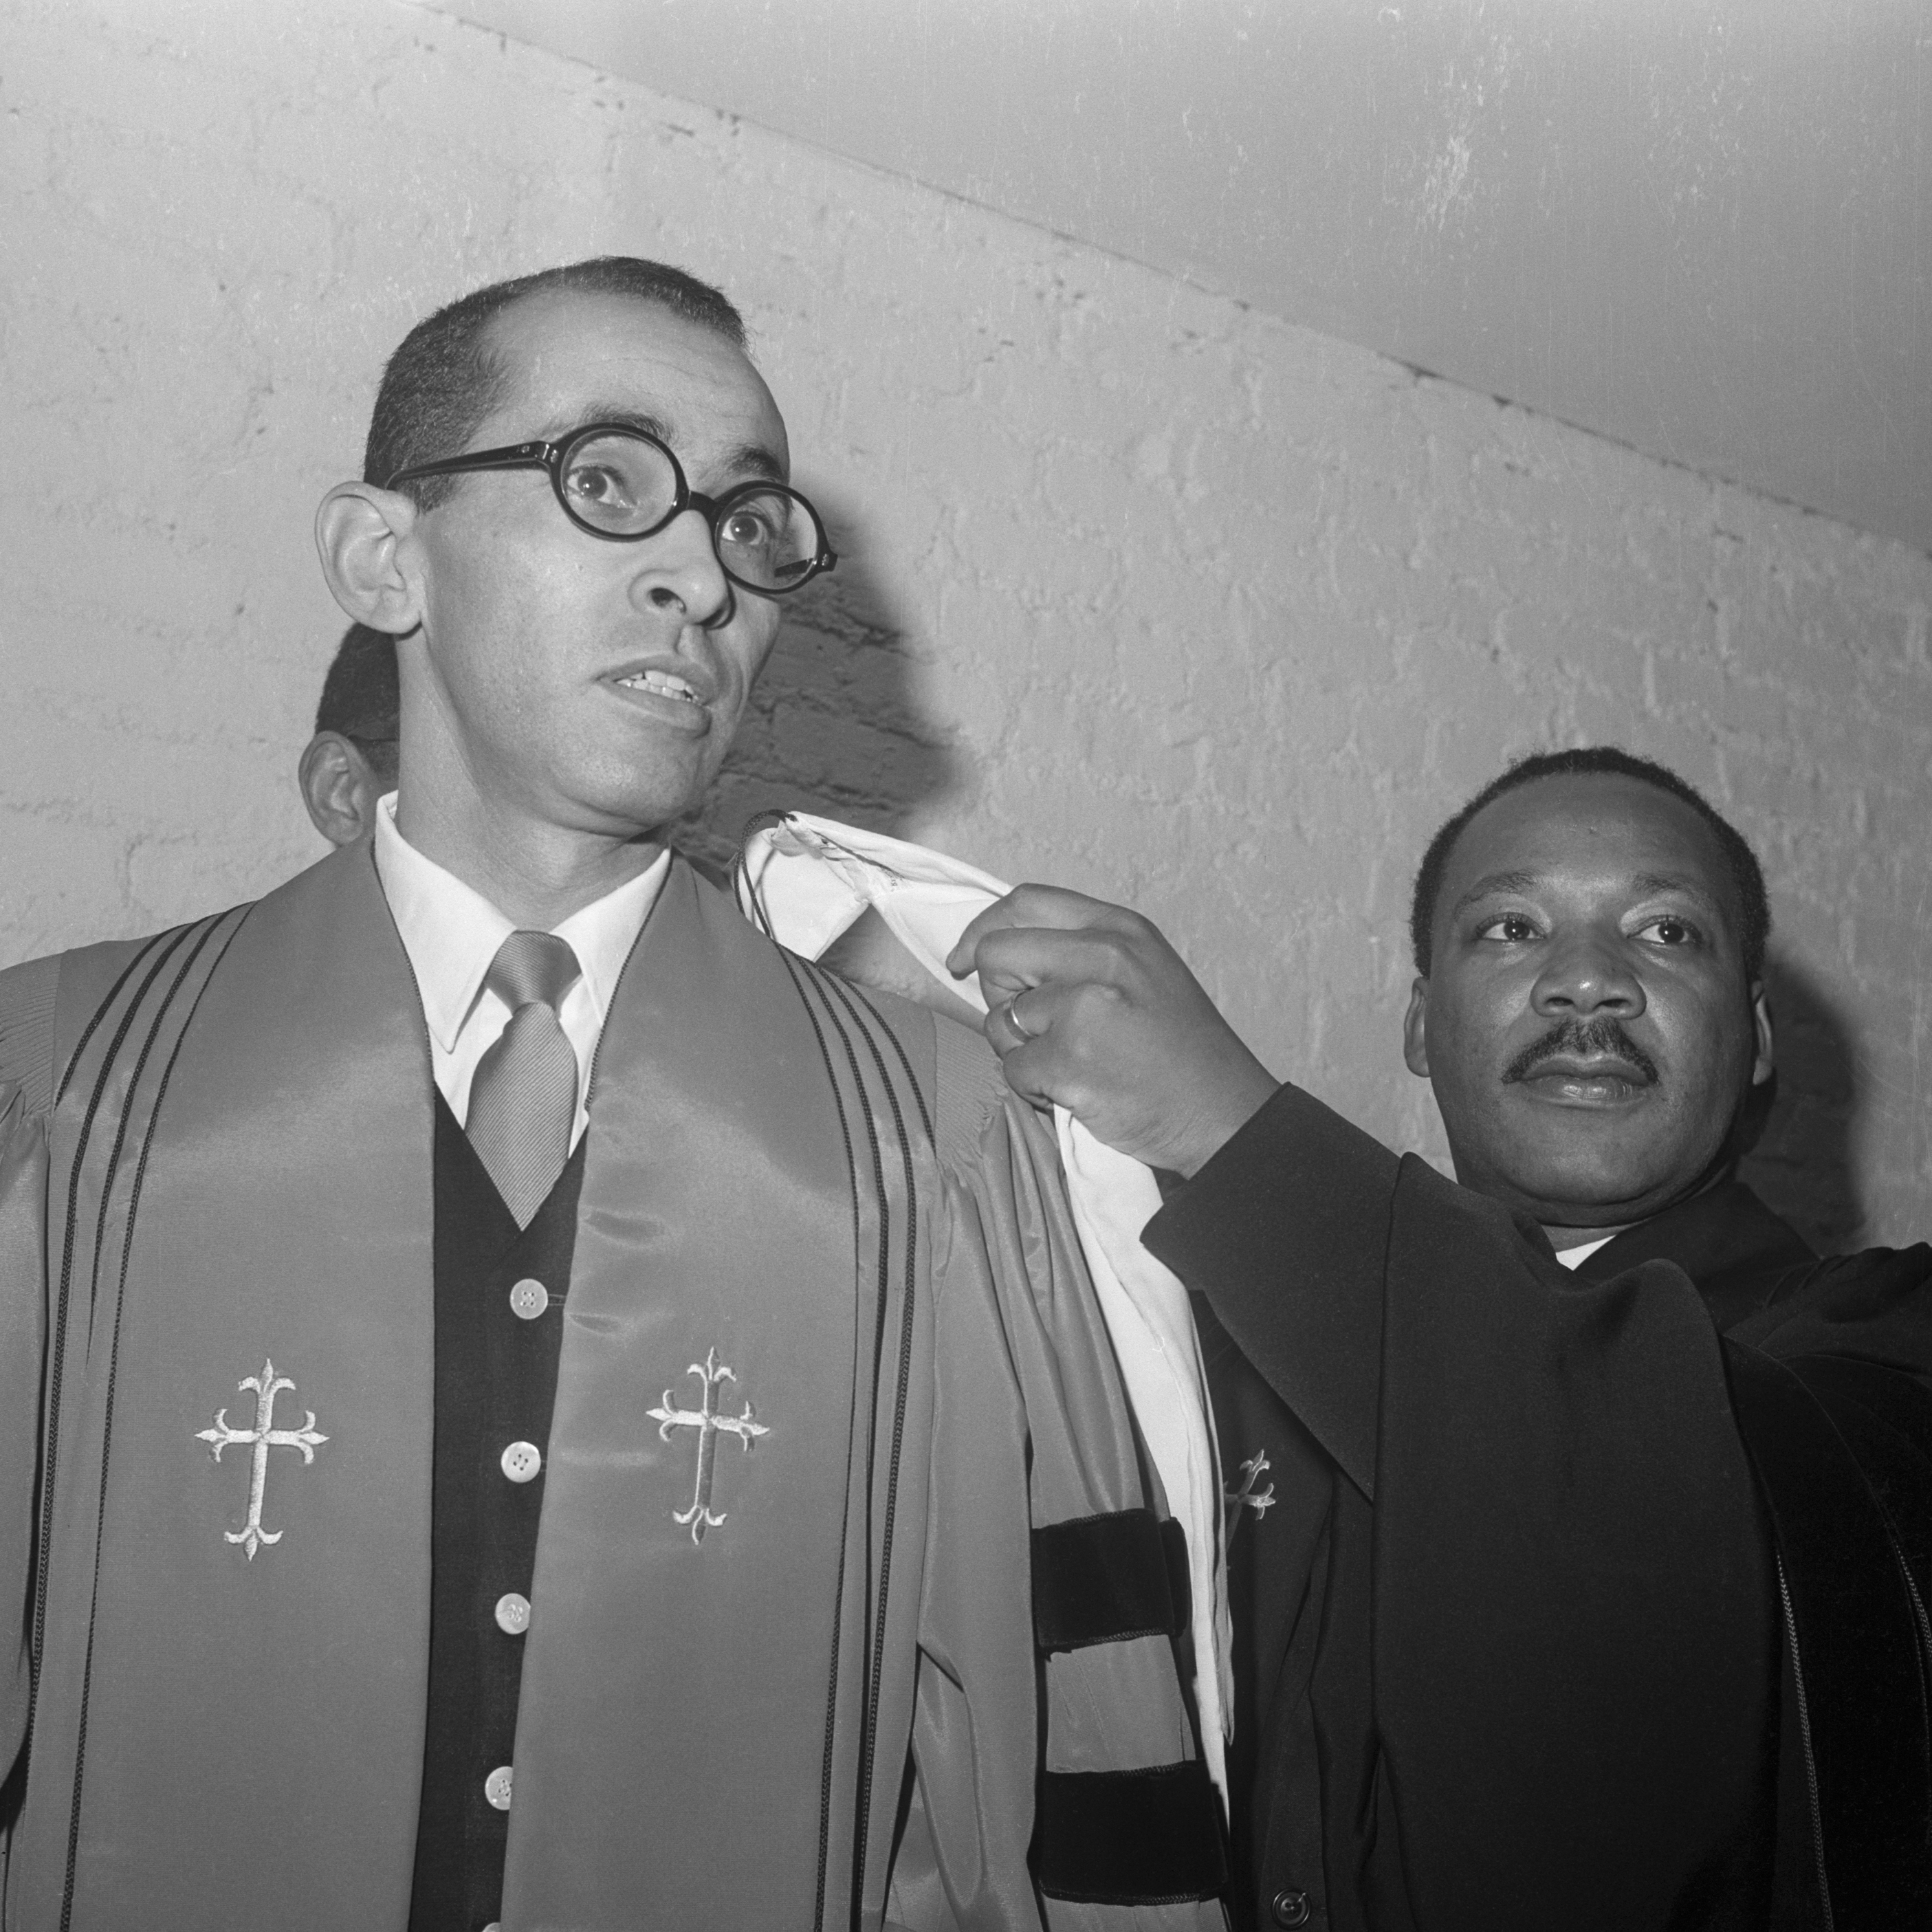 Civil rights leader Dr. Martin Luther King (right) installs the Rev. Wyatt T. Walker as pastor of the New Canaan Baptist Church.